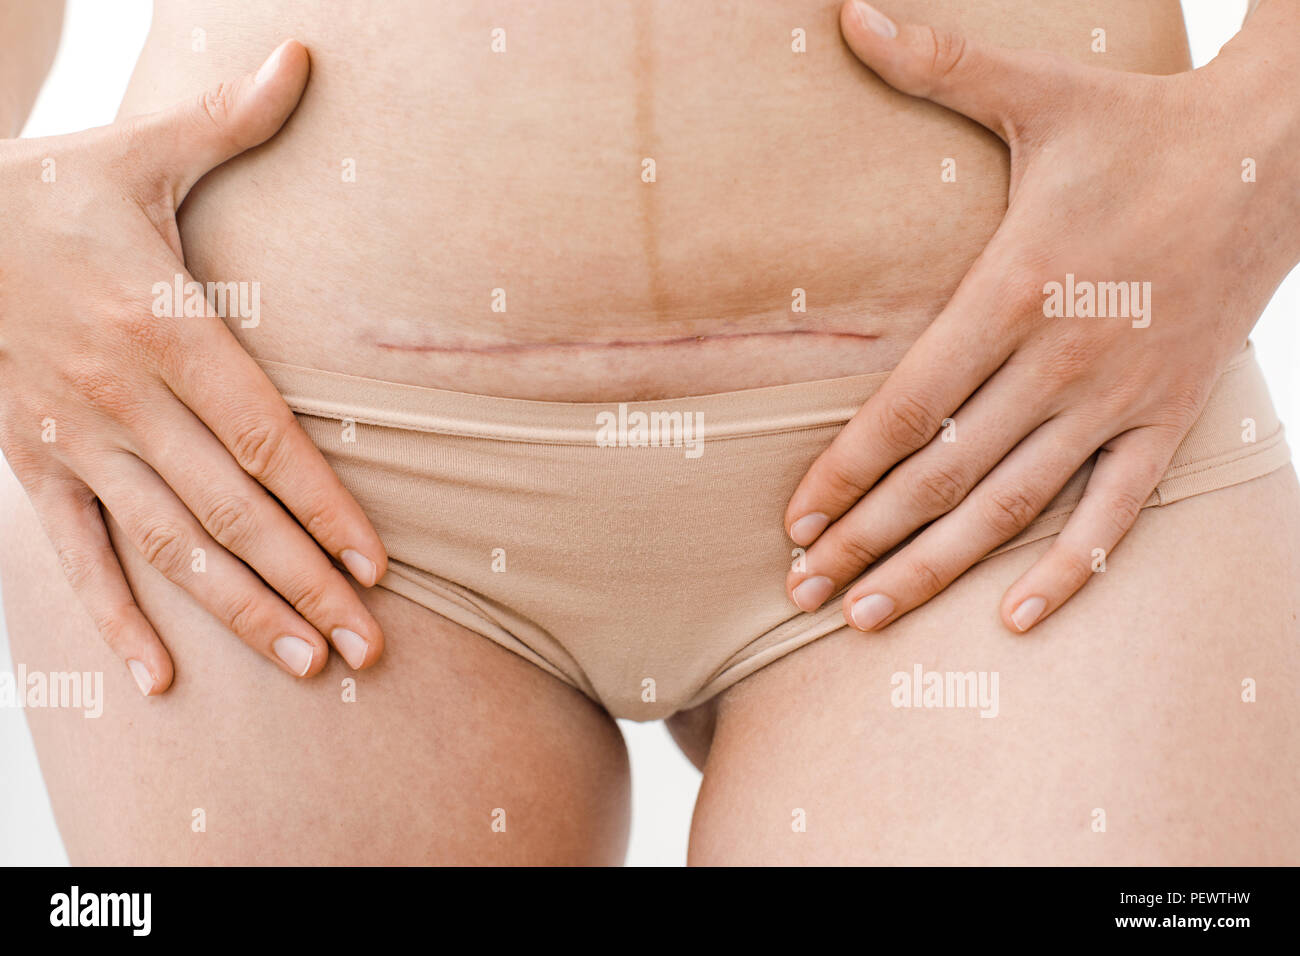 closeup of woman's belly with a scar from a cesarean section Stock Photo